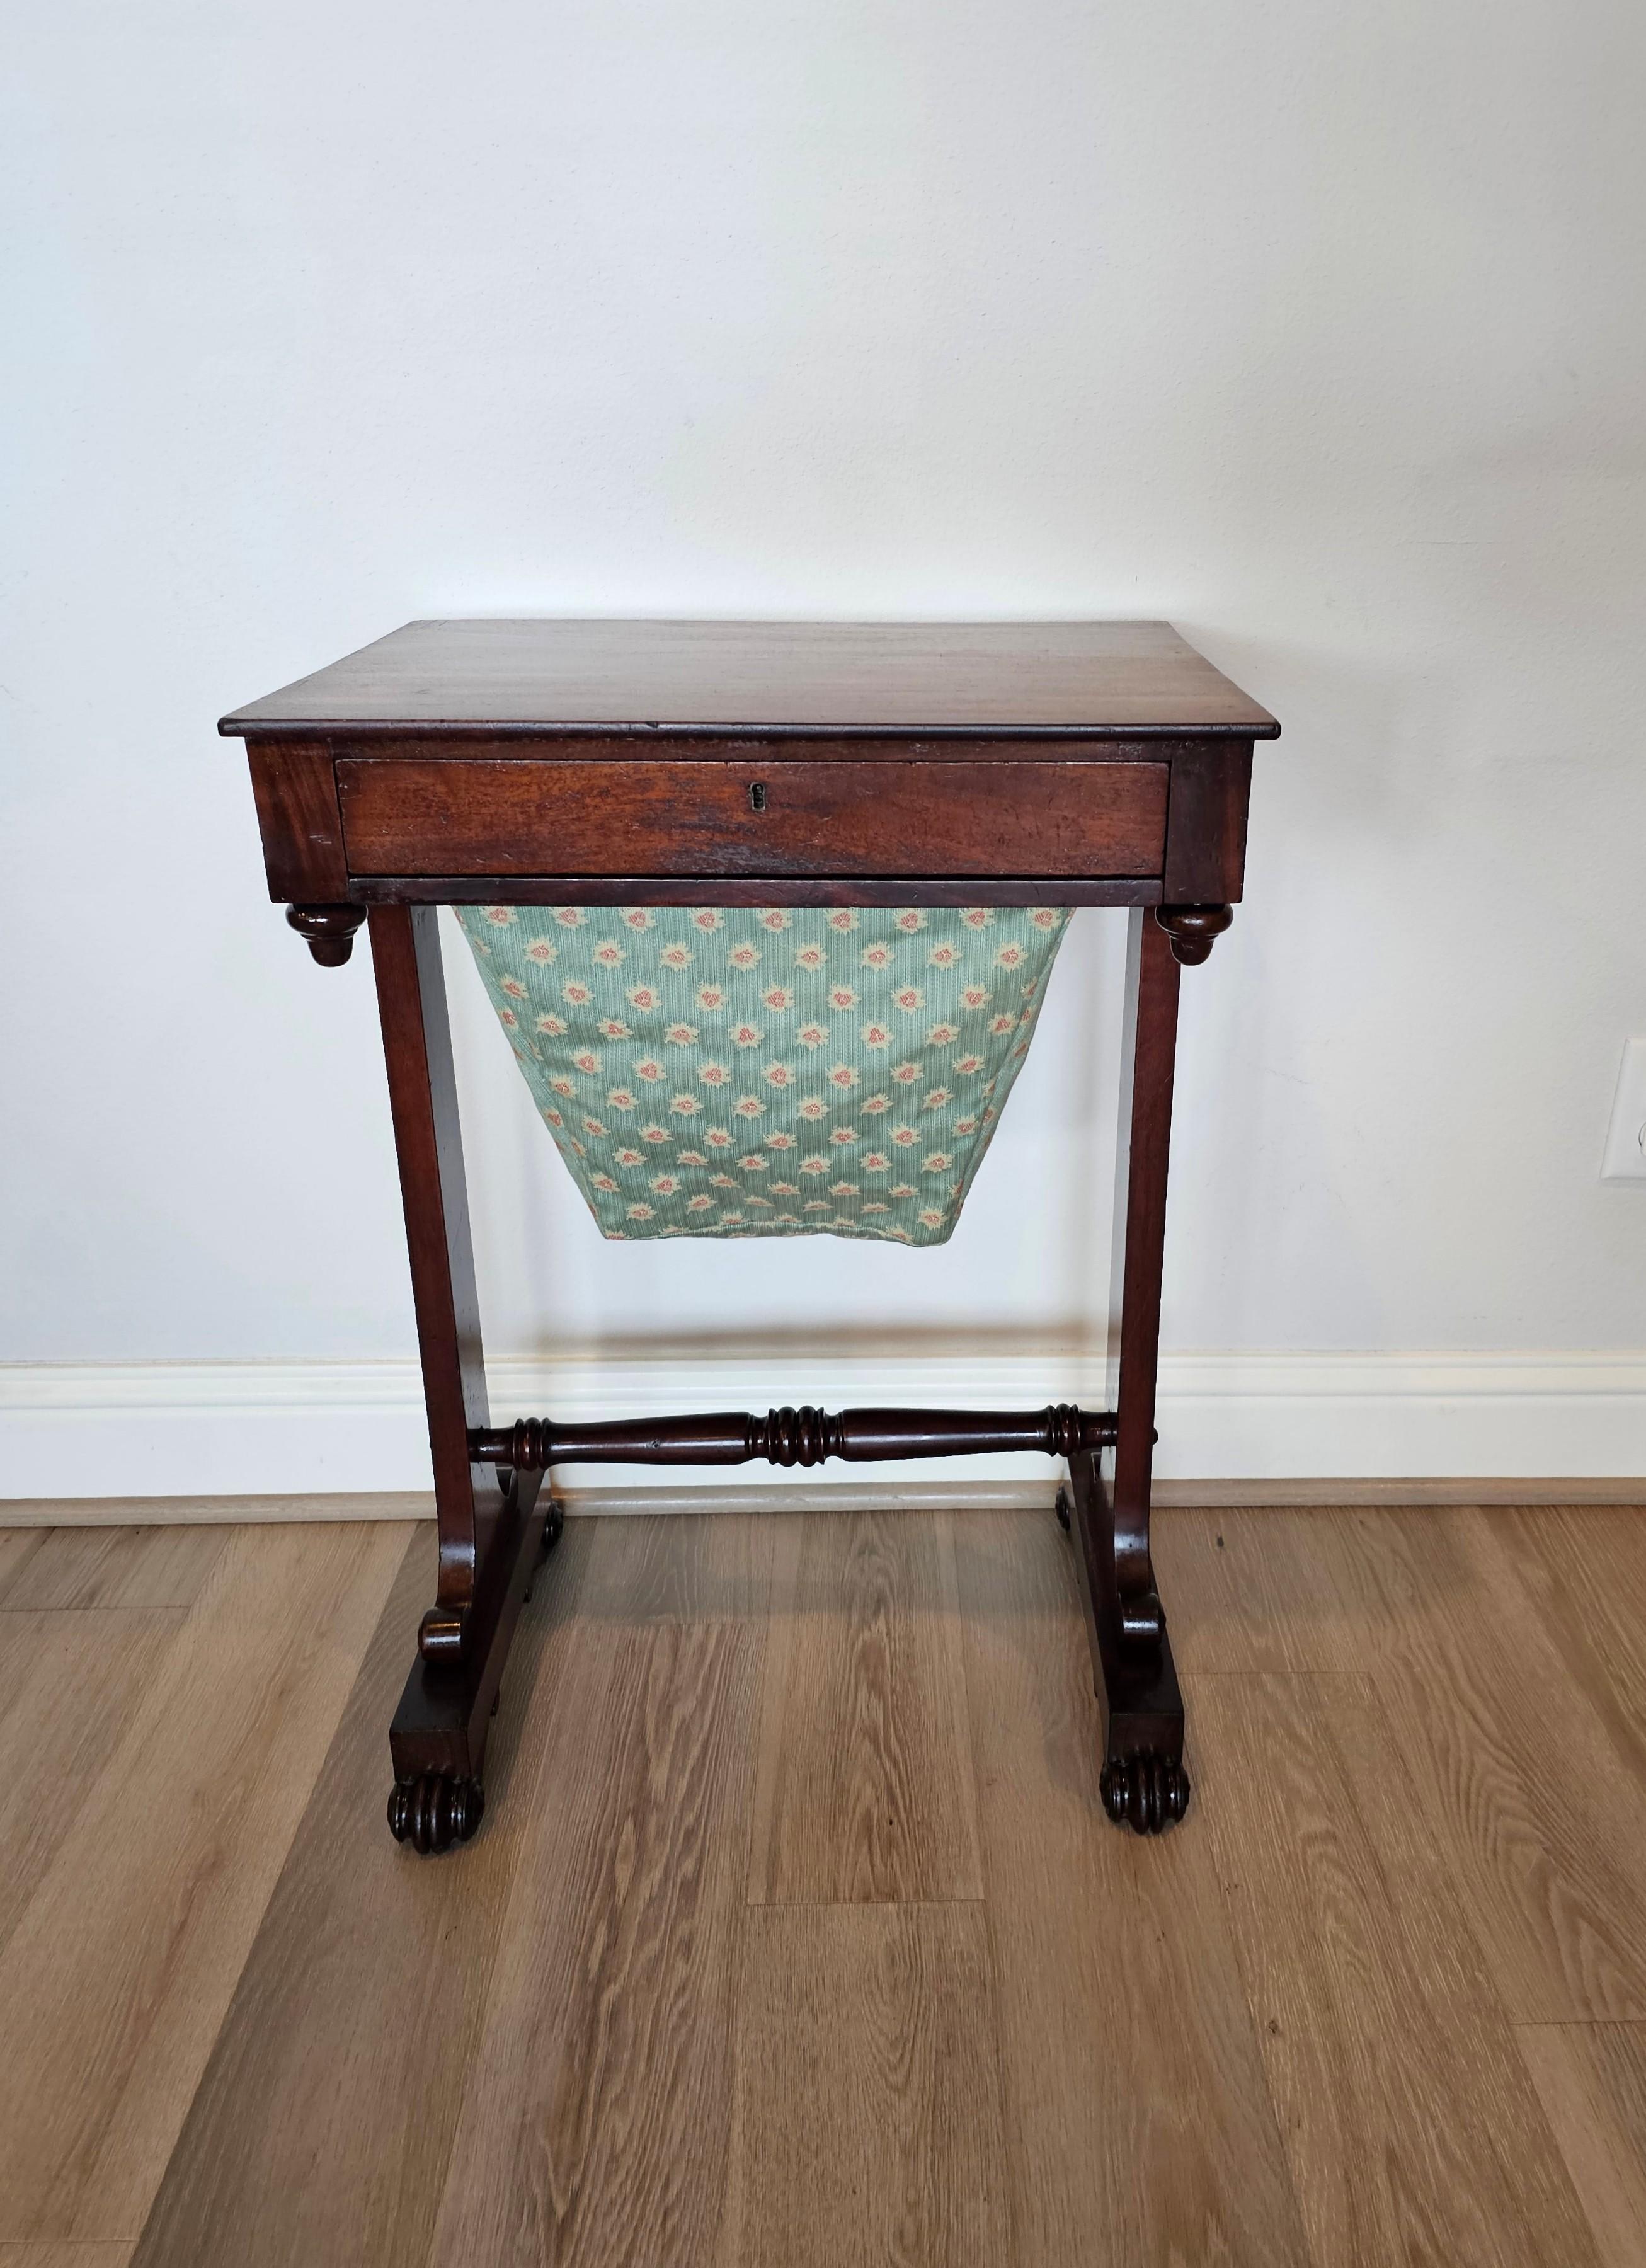 A scarce nearly 200 year old English William IV Period rosewood and mahogany sewing stand work table with beautifully aged warm rustic patina. circa 1830s 

Combining sophisticated elegance, warmth, classic simplicity, and functional design, this